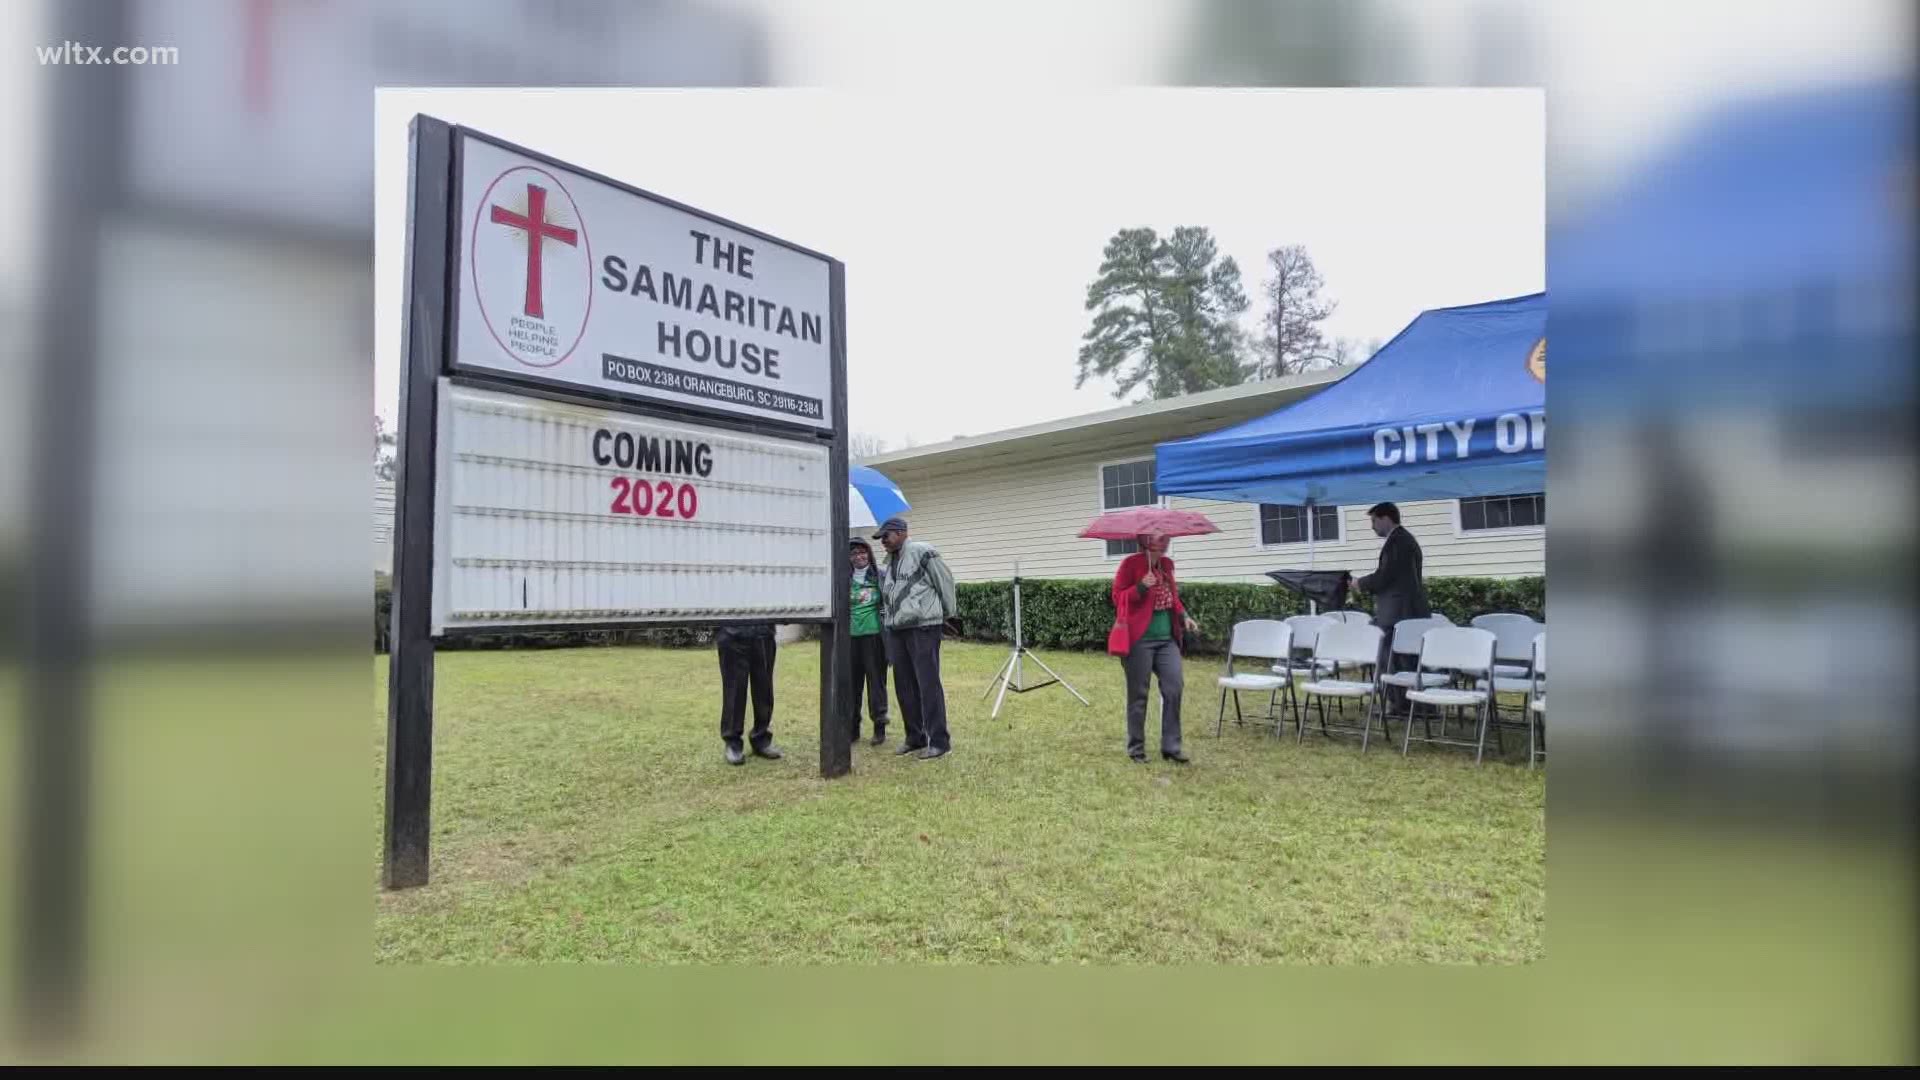 The Orangeburg homeless shelter has been closed since 2016 because of lack of funding.